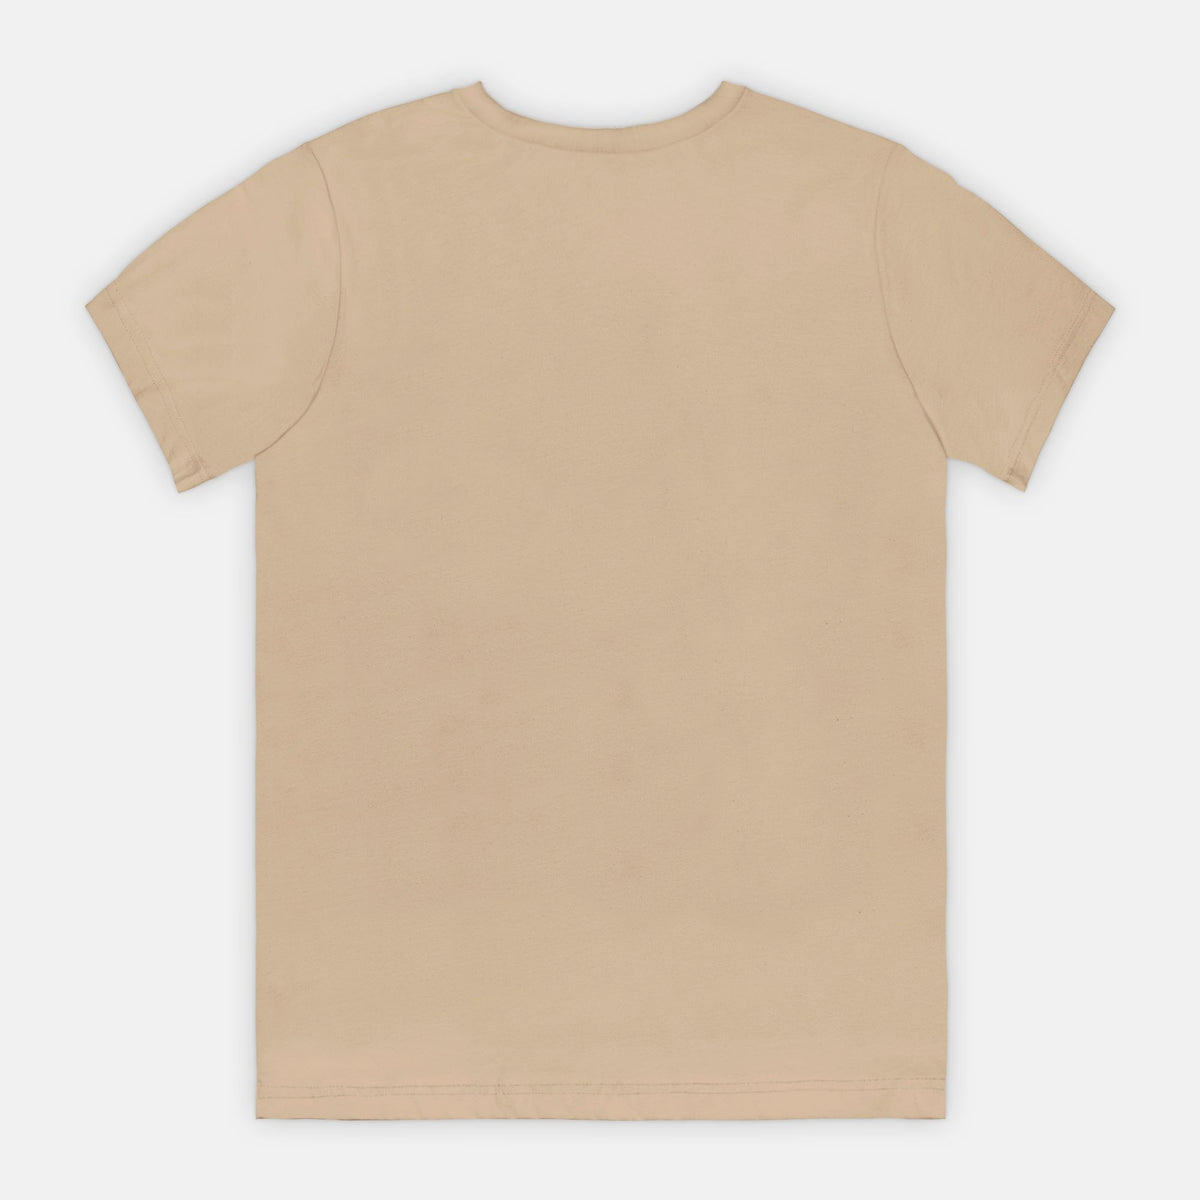 Sixth Grade Checked Out Tee